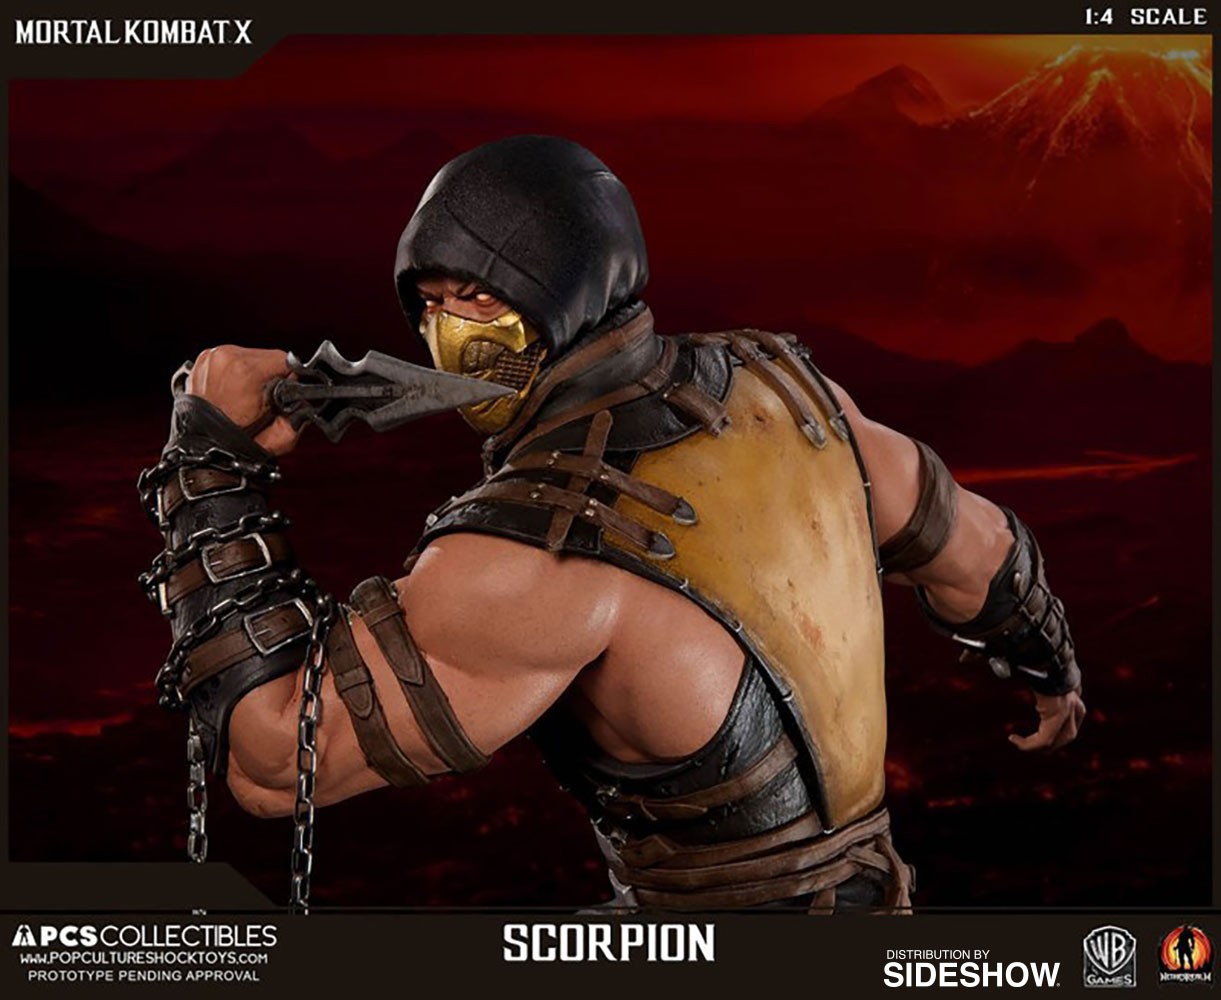 Scorpion Exclusive Edition View 22